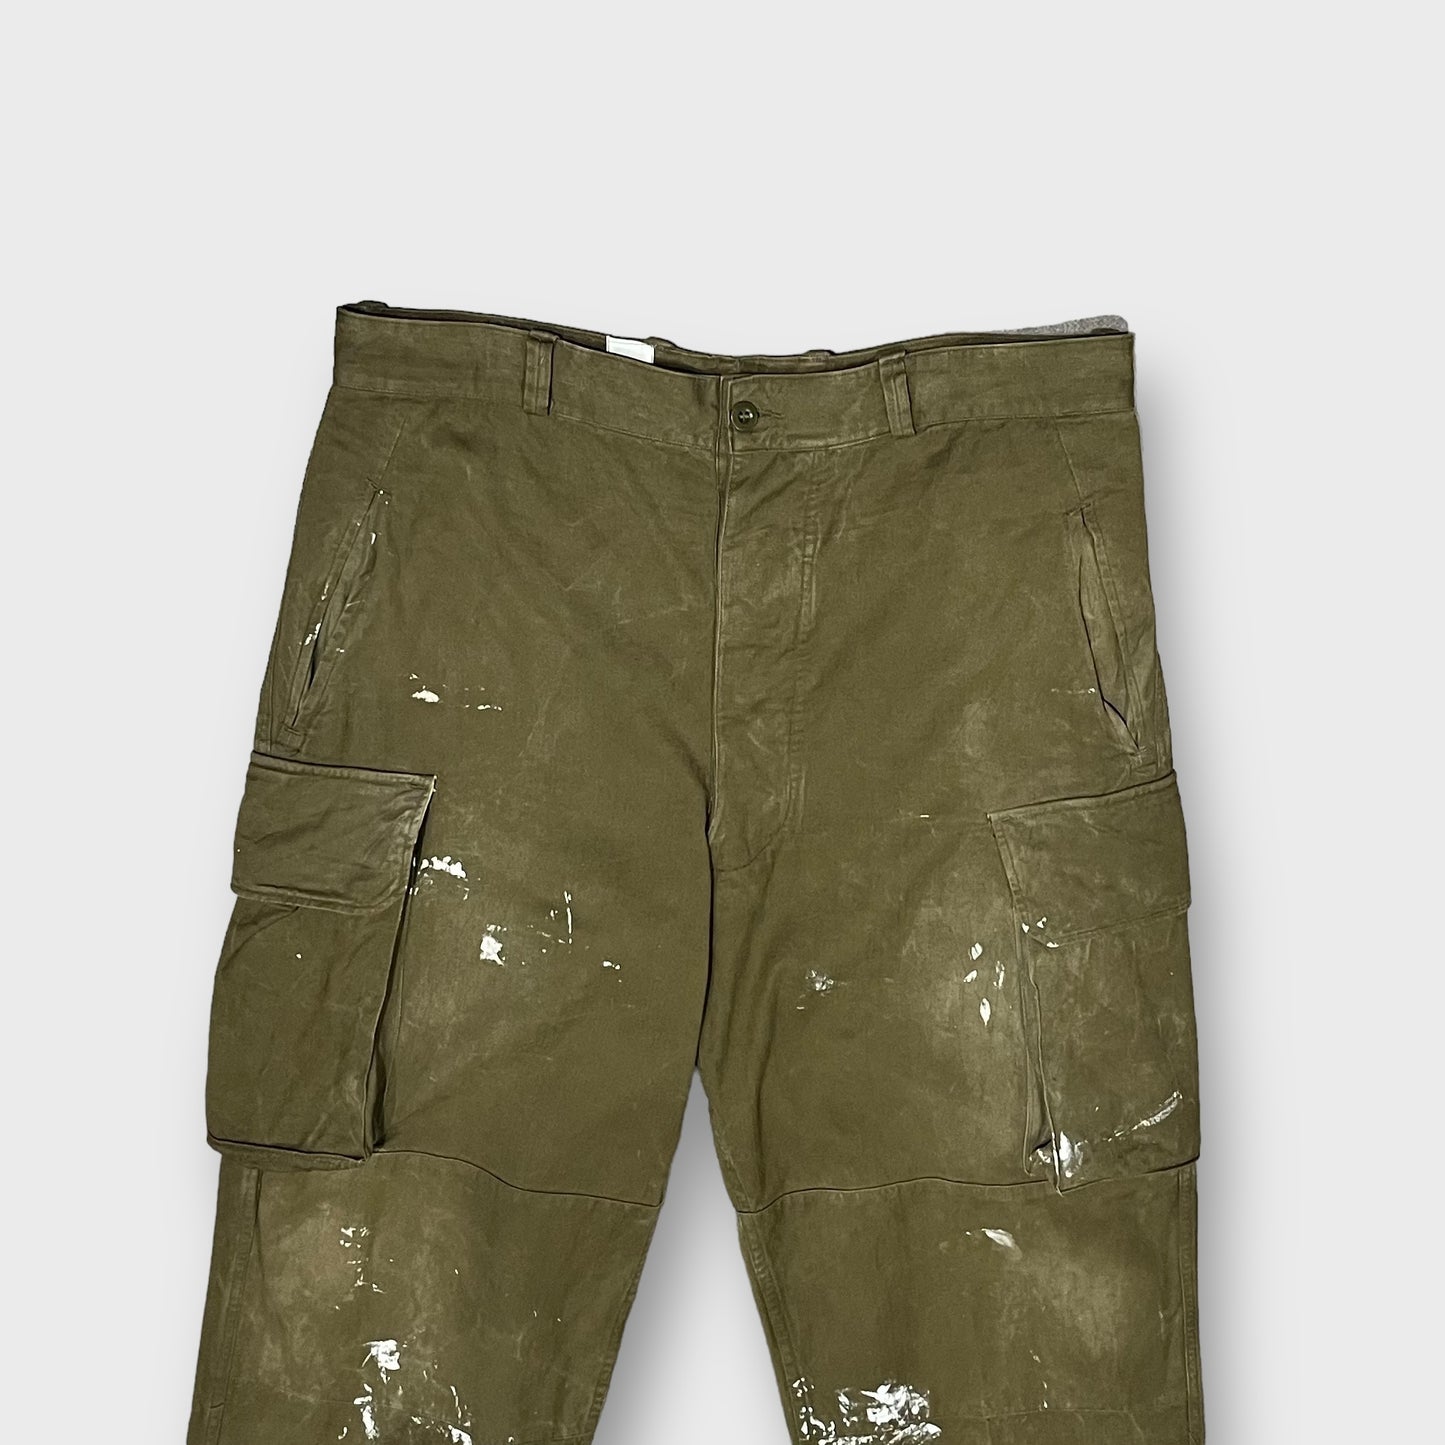 60’s french army m-47
cargo pants